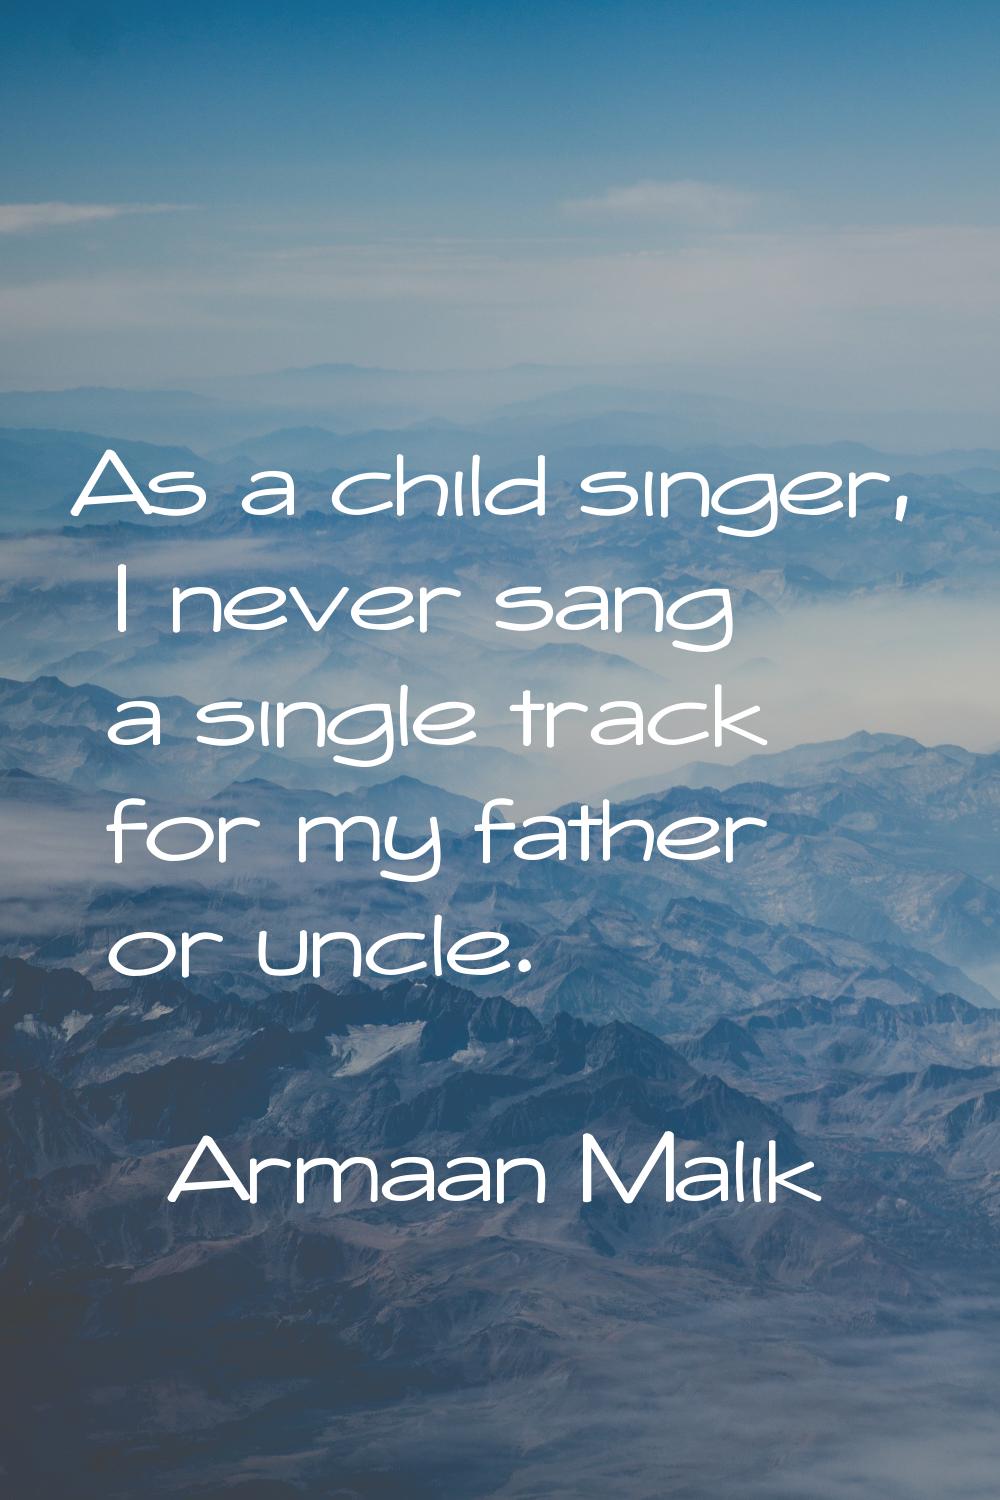 As a child singer, I never sang a single track for my father or uncle.